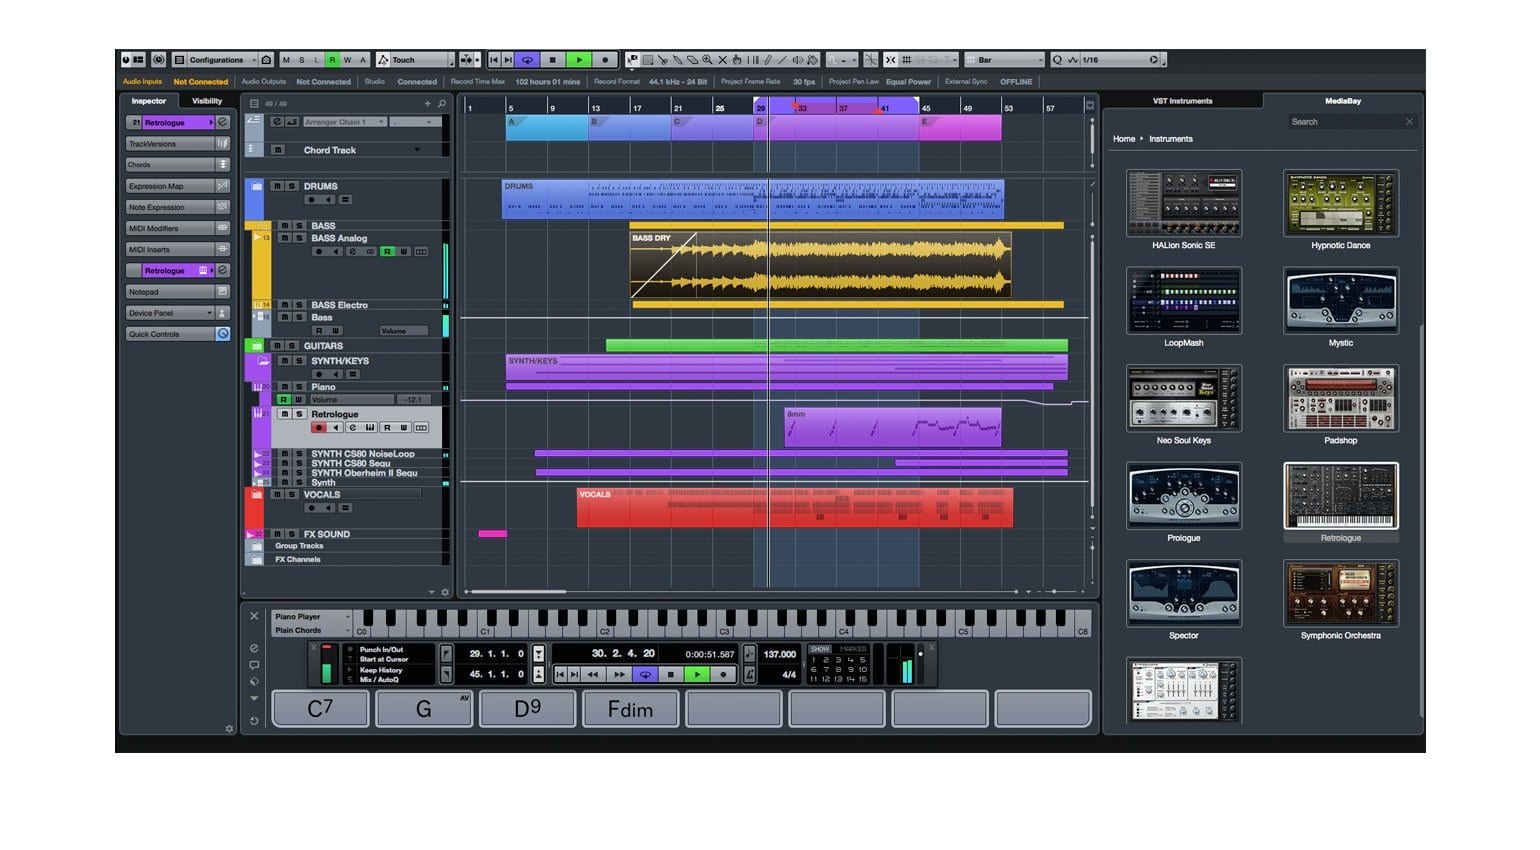 Steinberg unveils 9.5 updates to Cubase Pro, Artist, and Elements 